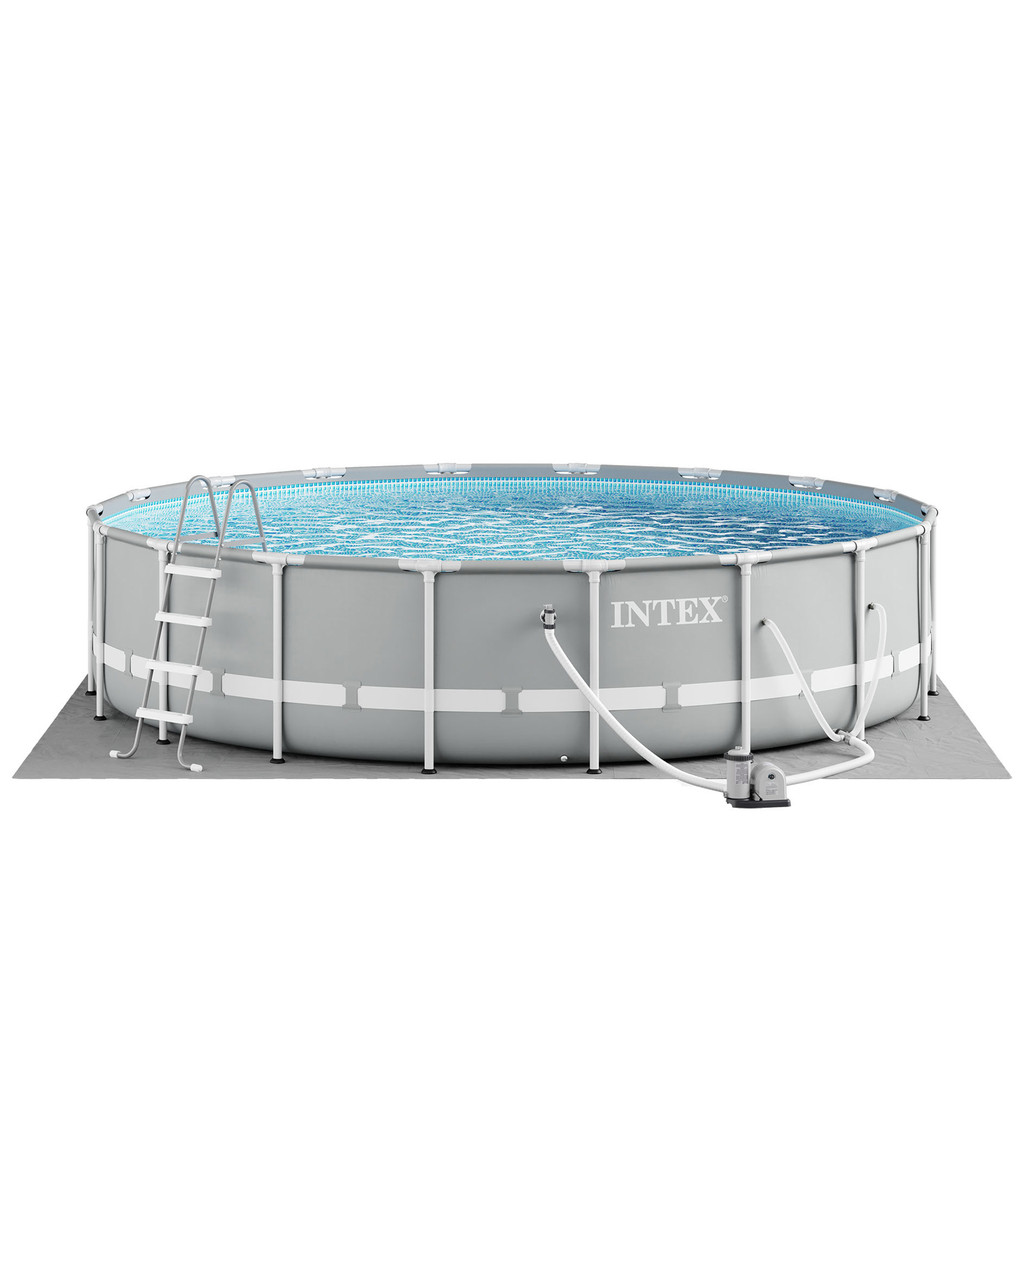 abhishek parcha recommends intex above ground pools 18 x 48 pic